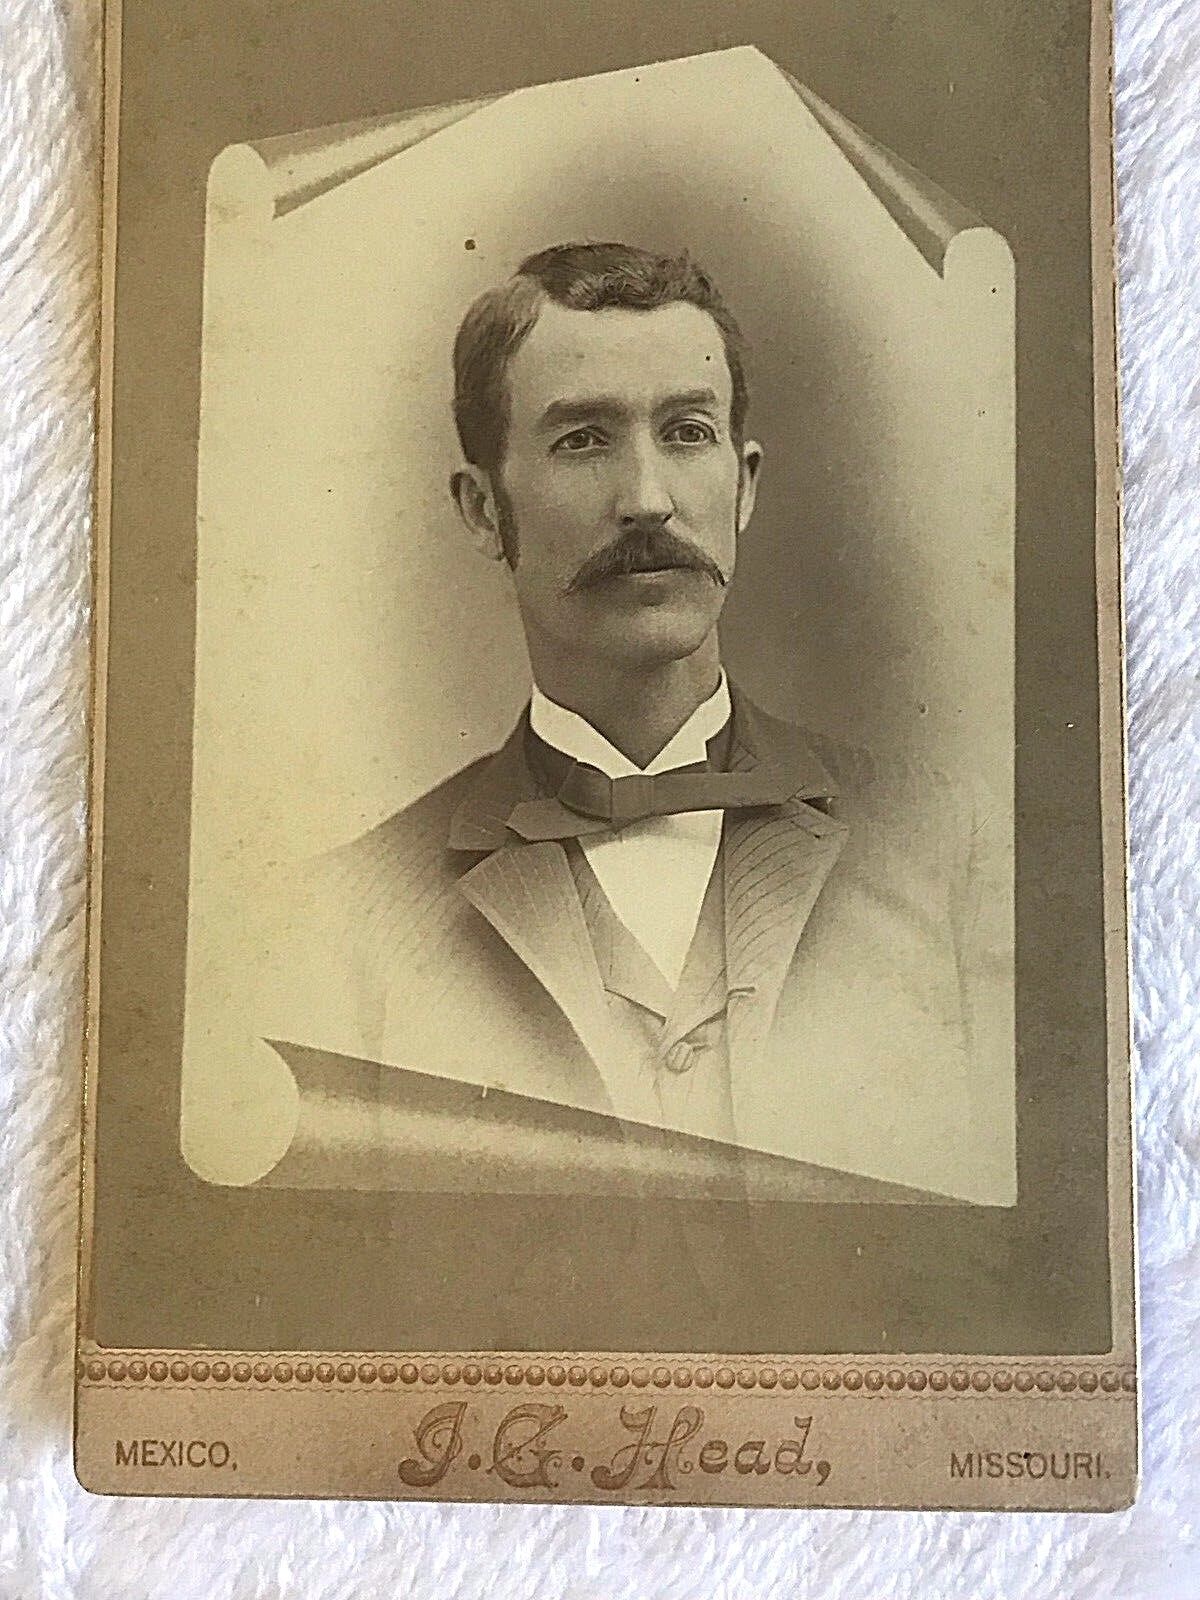  1890-99 Mourning Cabinet Card Photo A Passing Curled Edge Page Has Been Turned